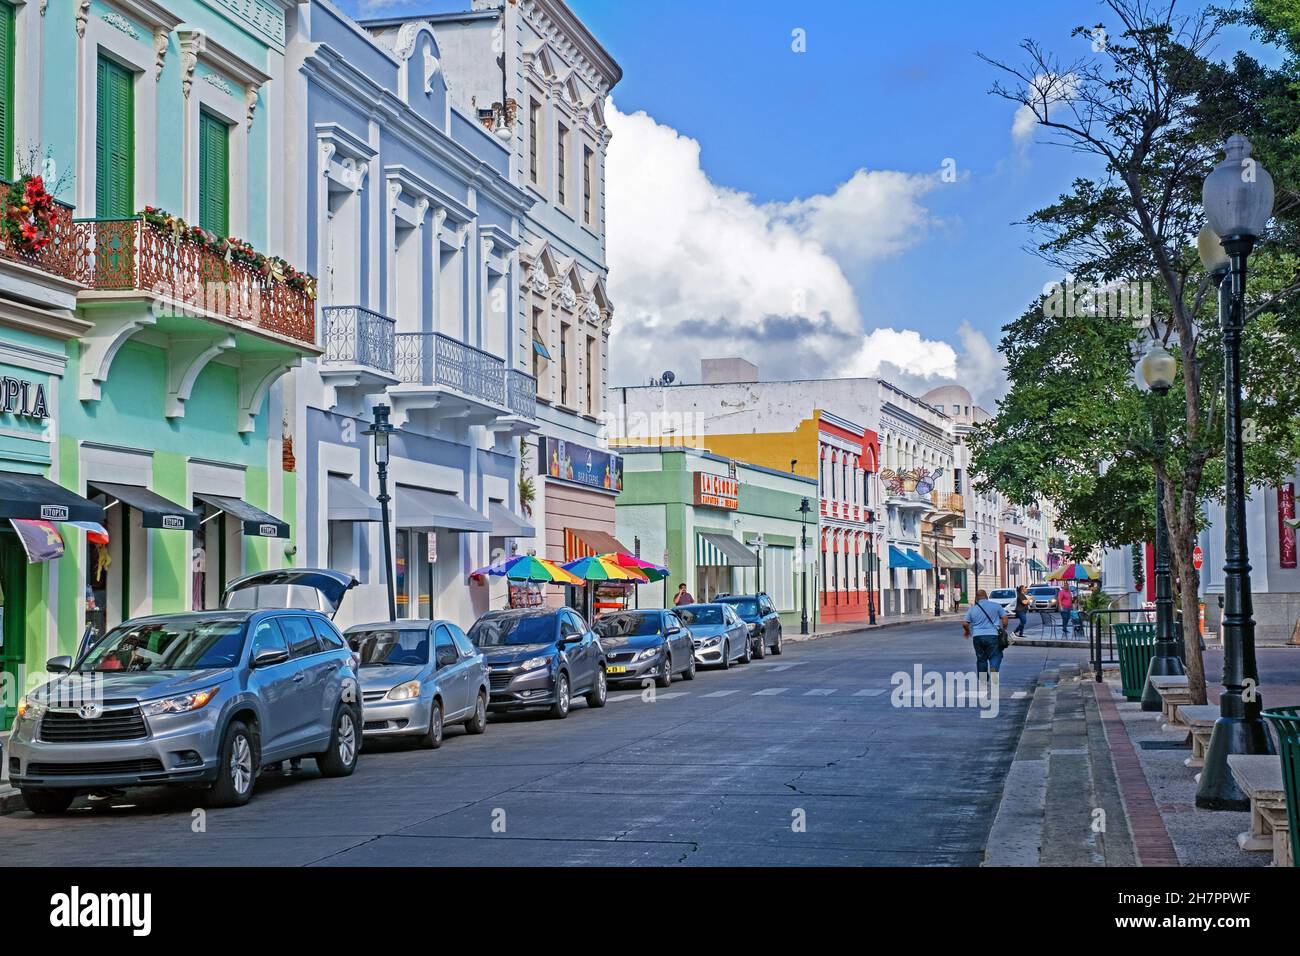 Street scene showing Spanish colonial buildings in the old historic district  of the city Ponce, southern Puerto Rico, Greater Antilles, Caribbean Stock Photo